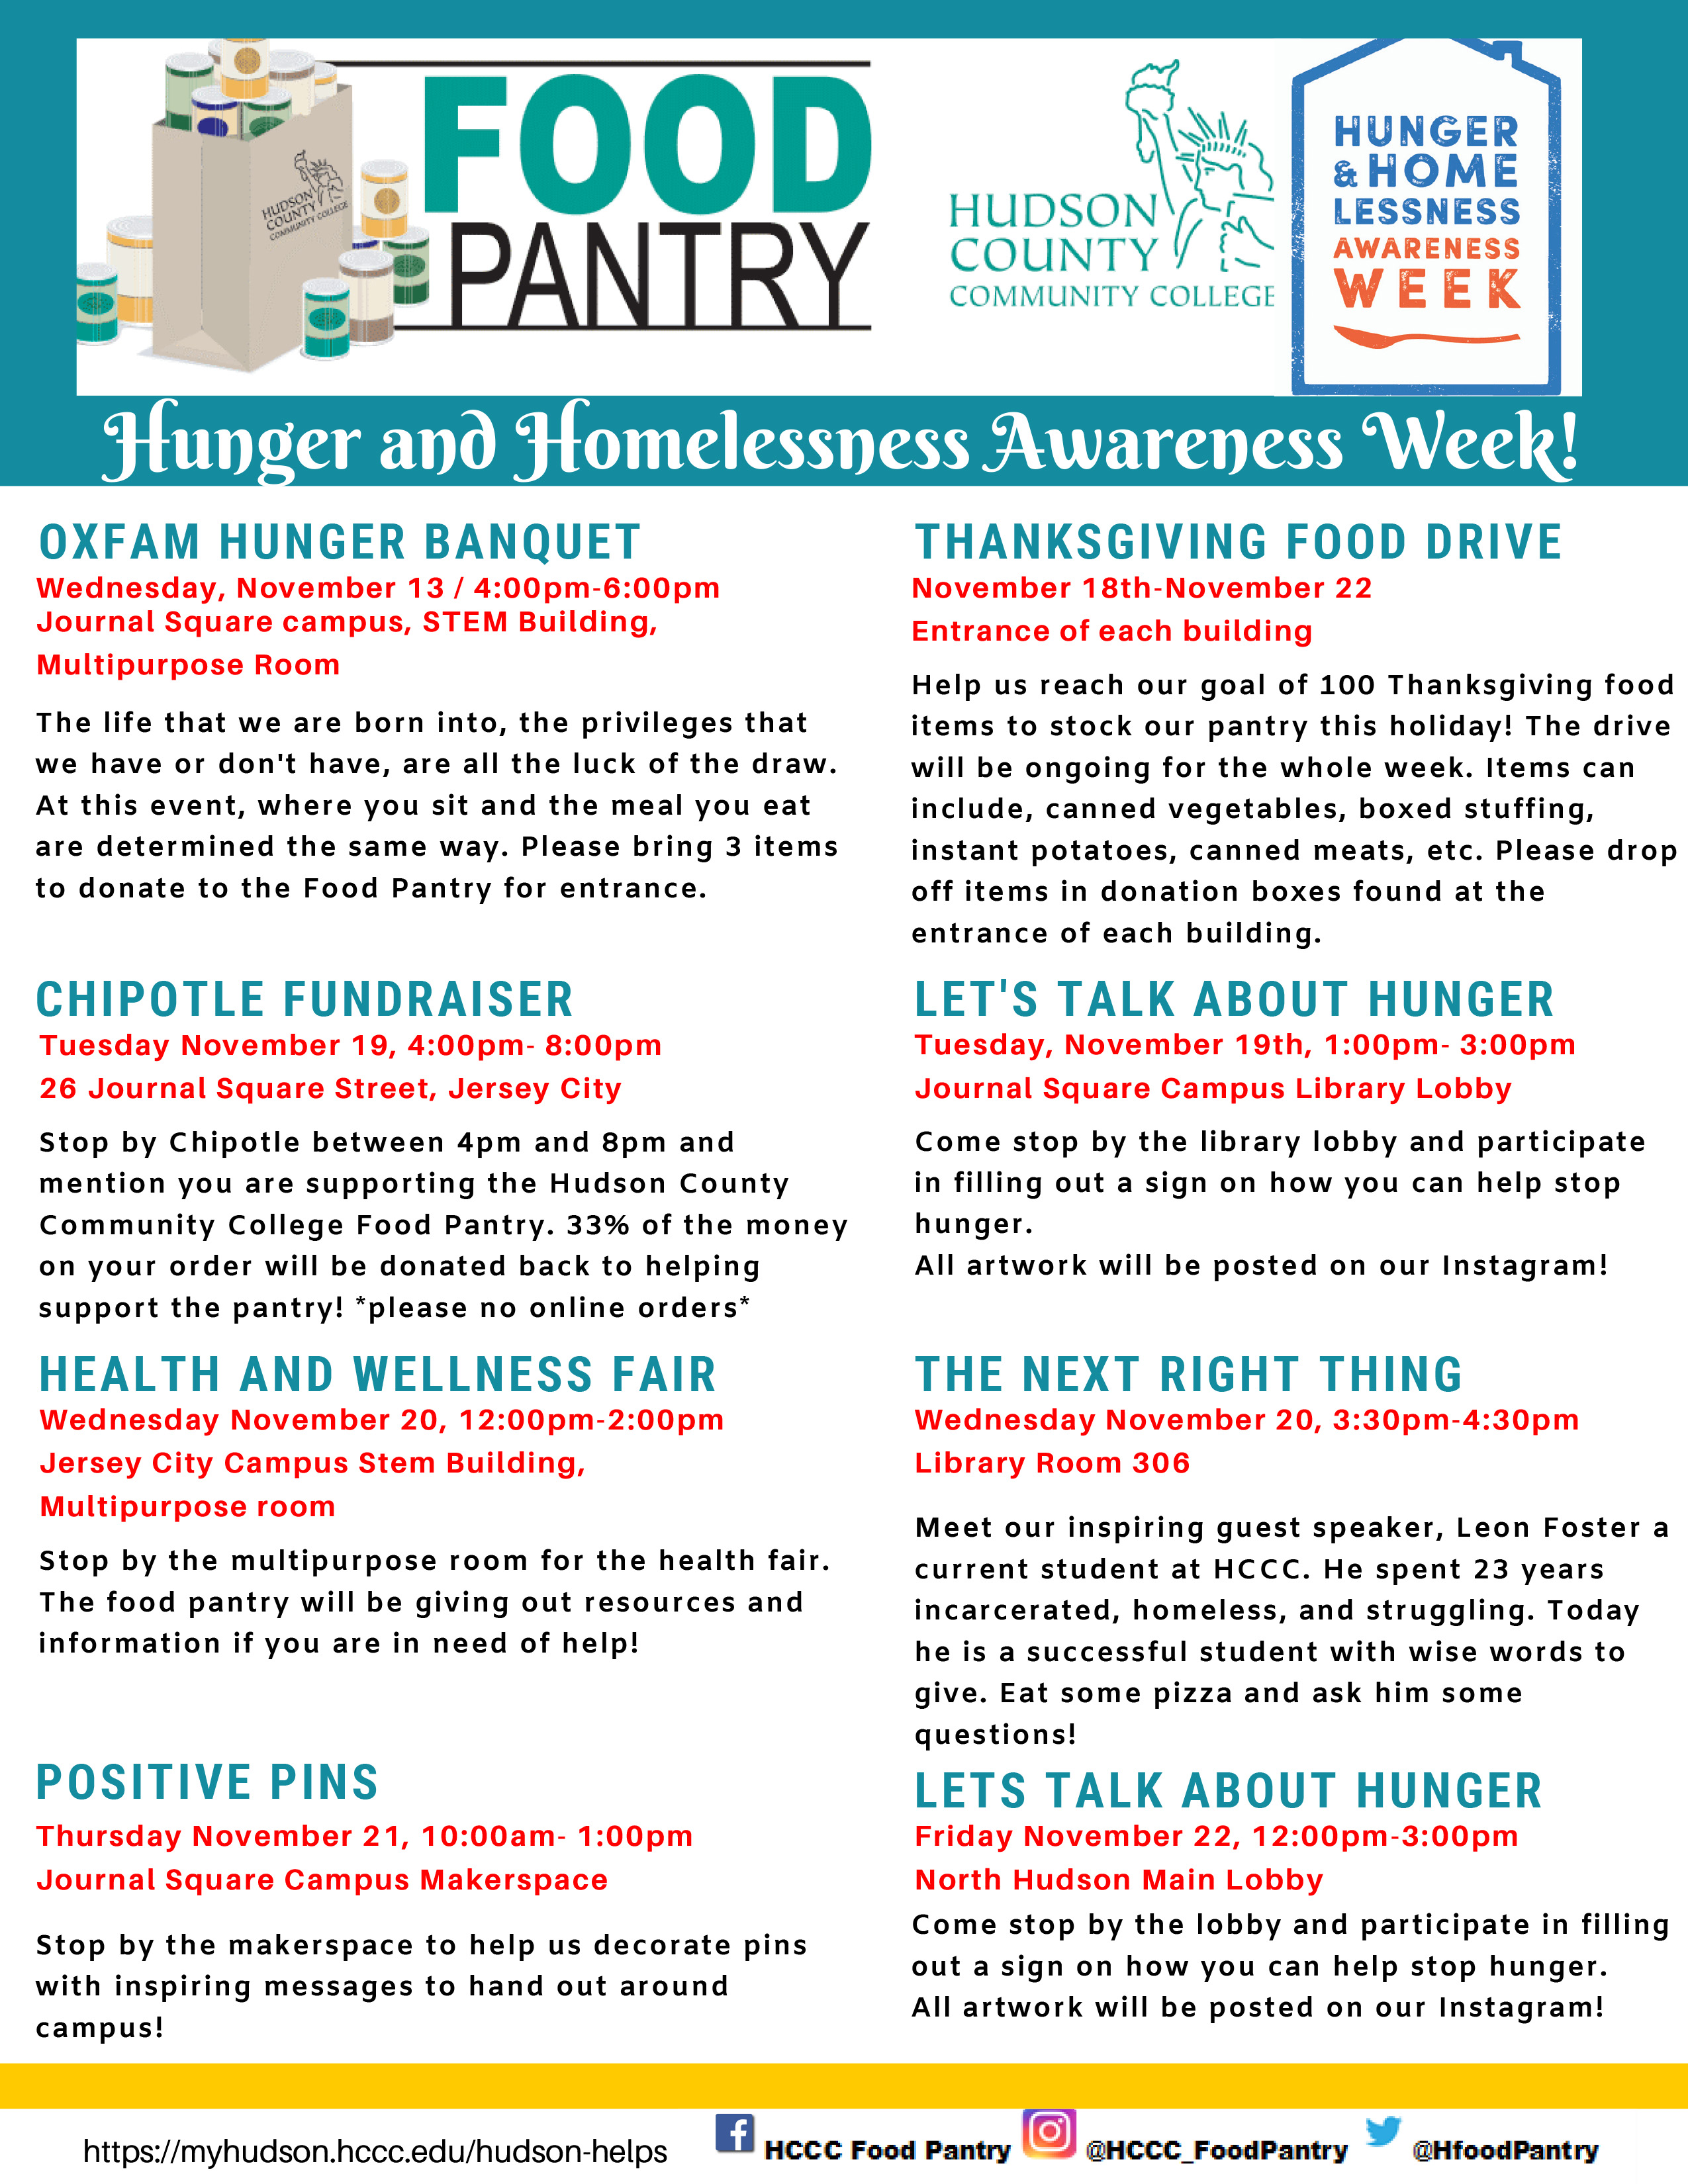 The Food Pantry Info Flyer.